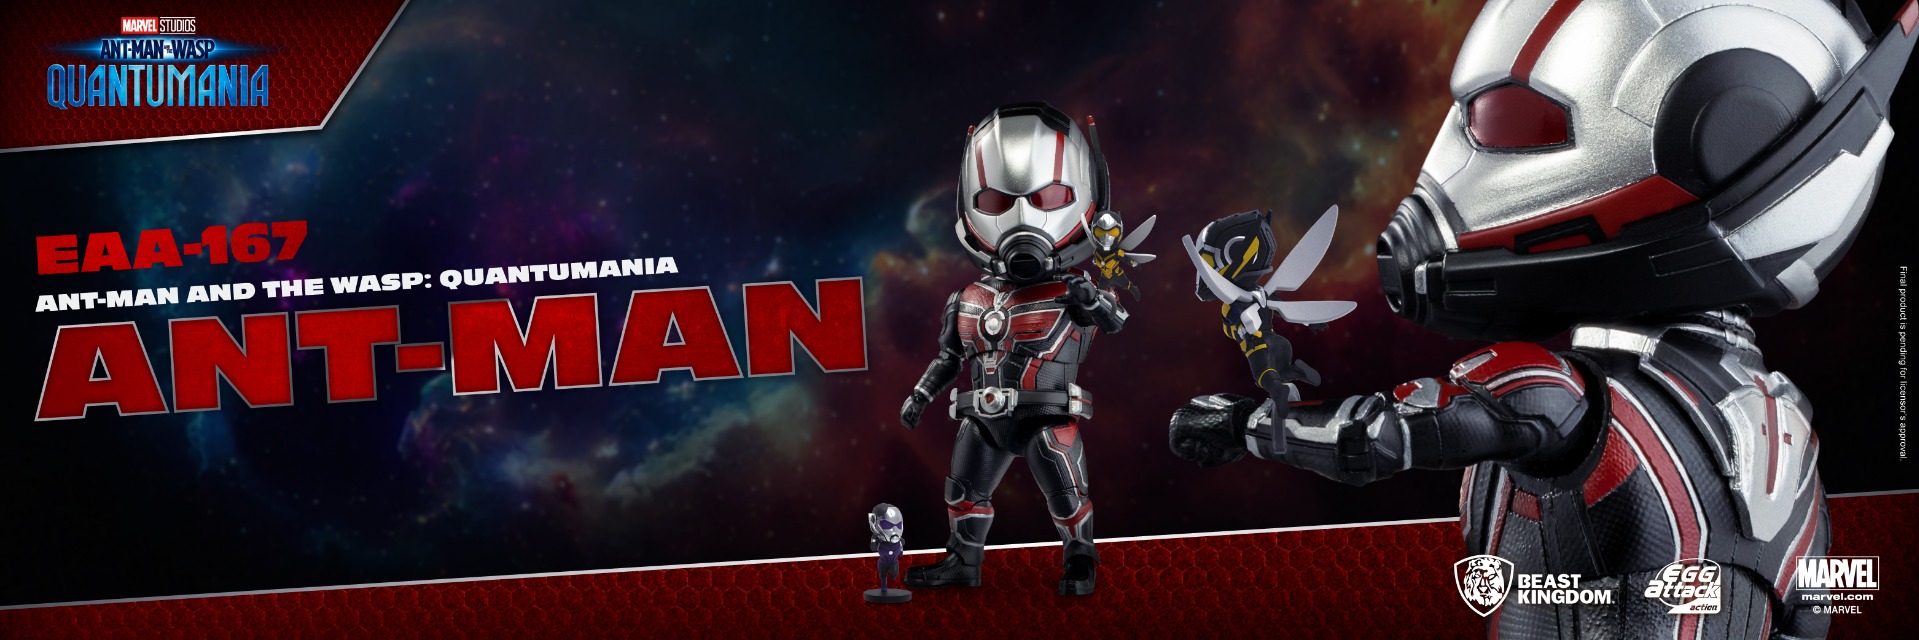 EAA-167 Ant-Man and the Wasp: Quantumania Ant-Man